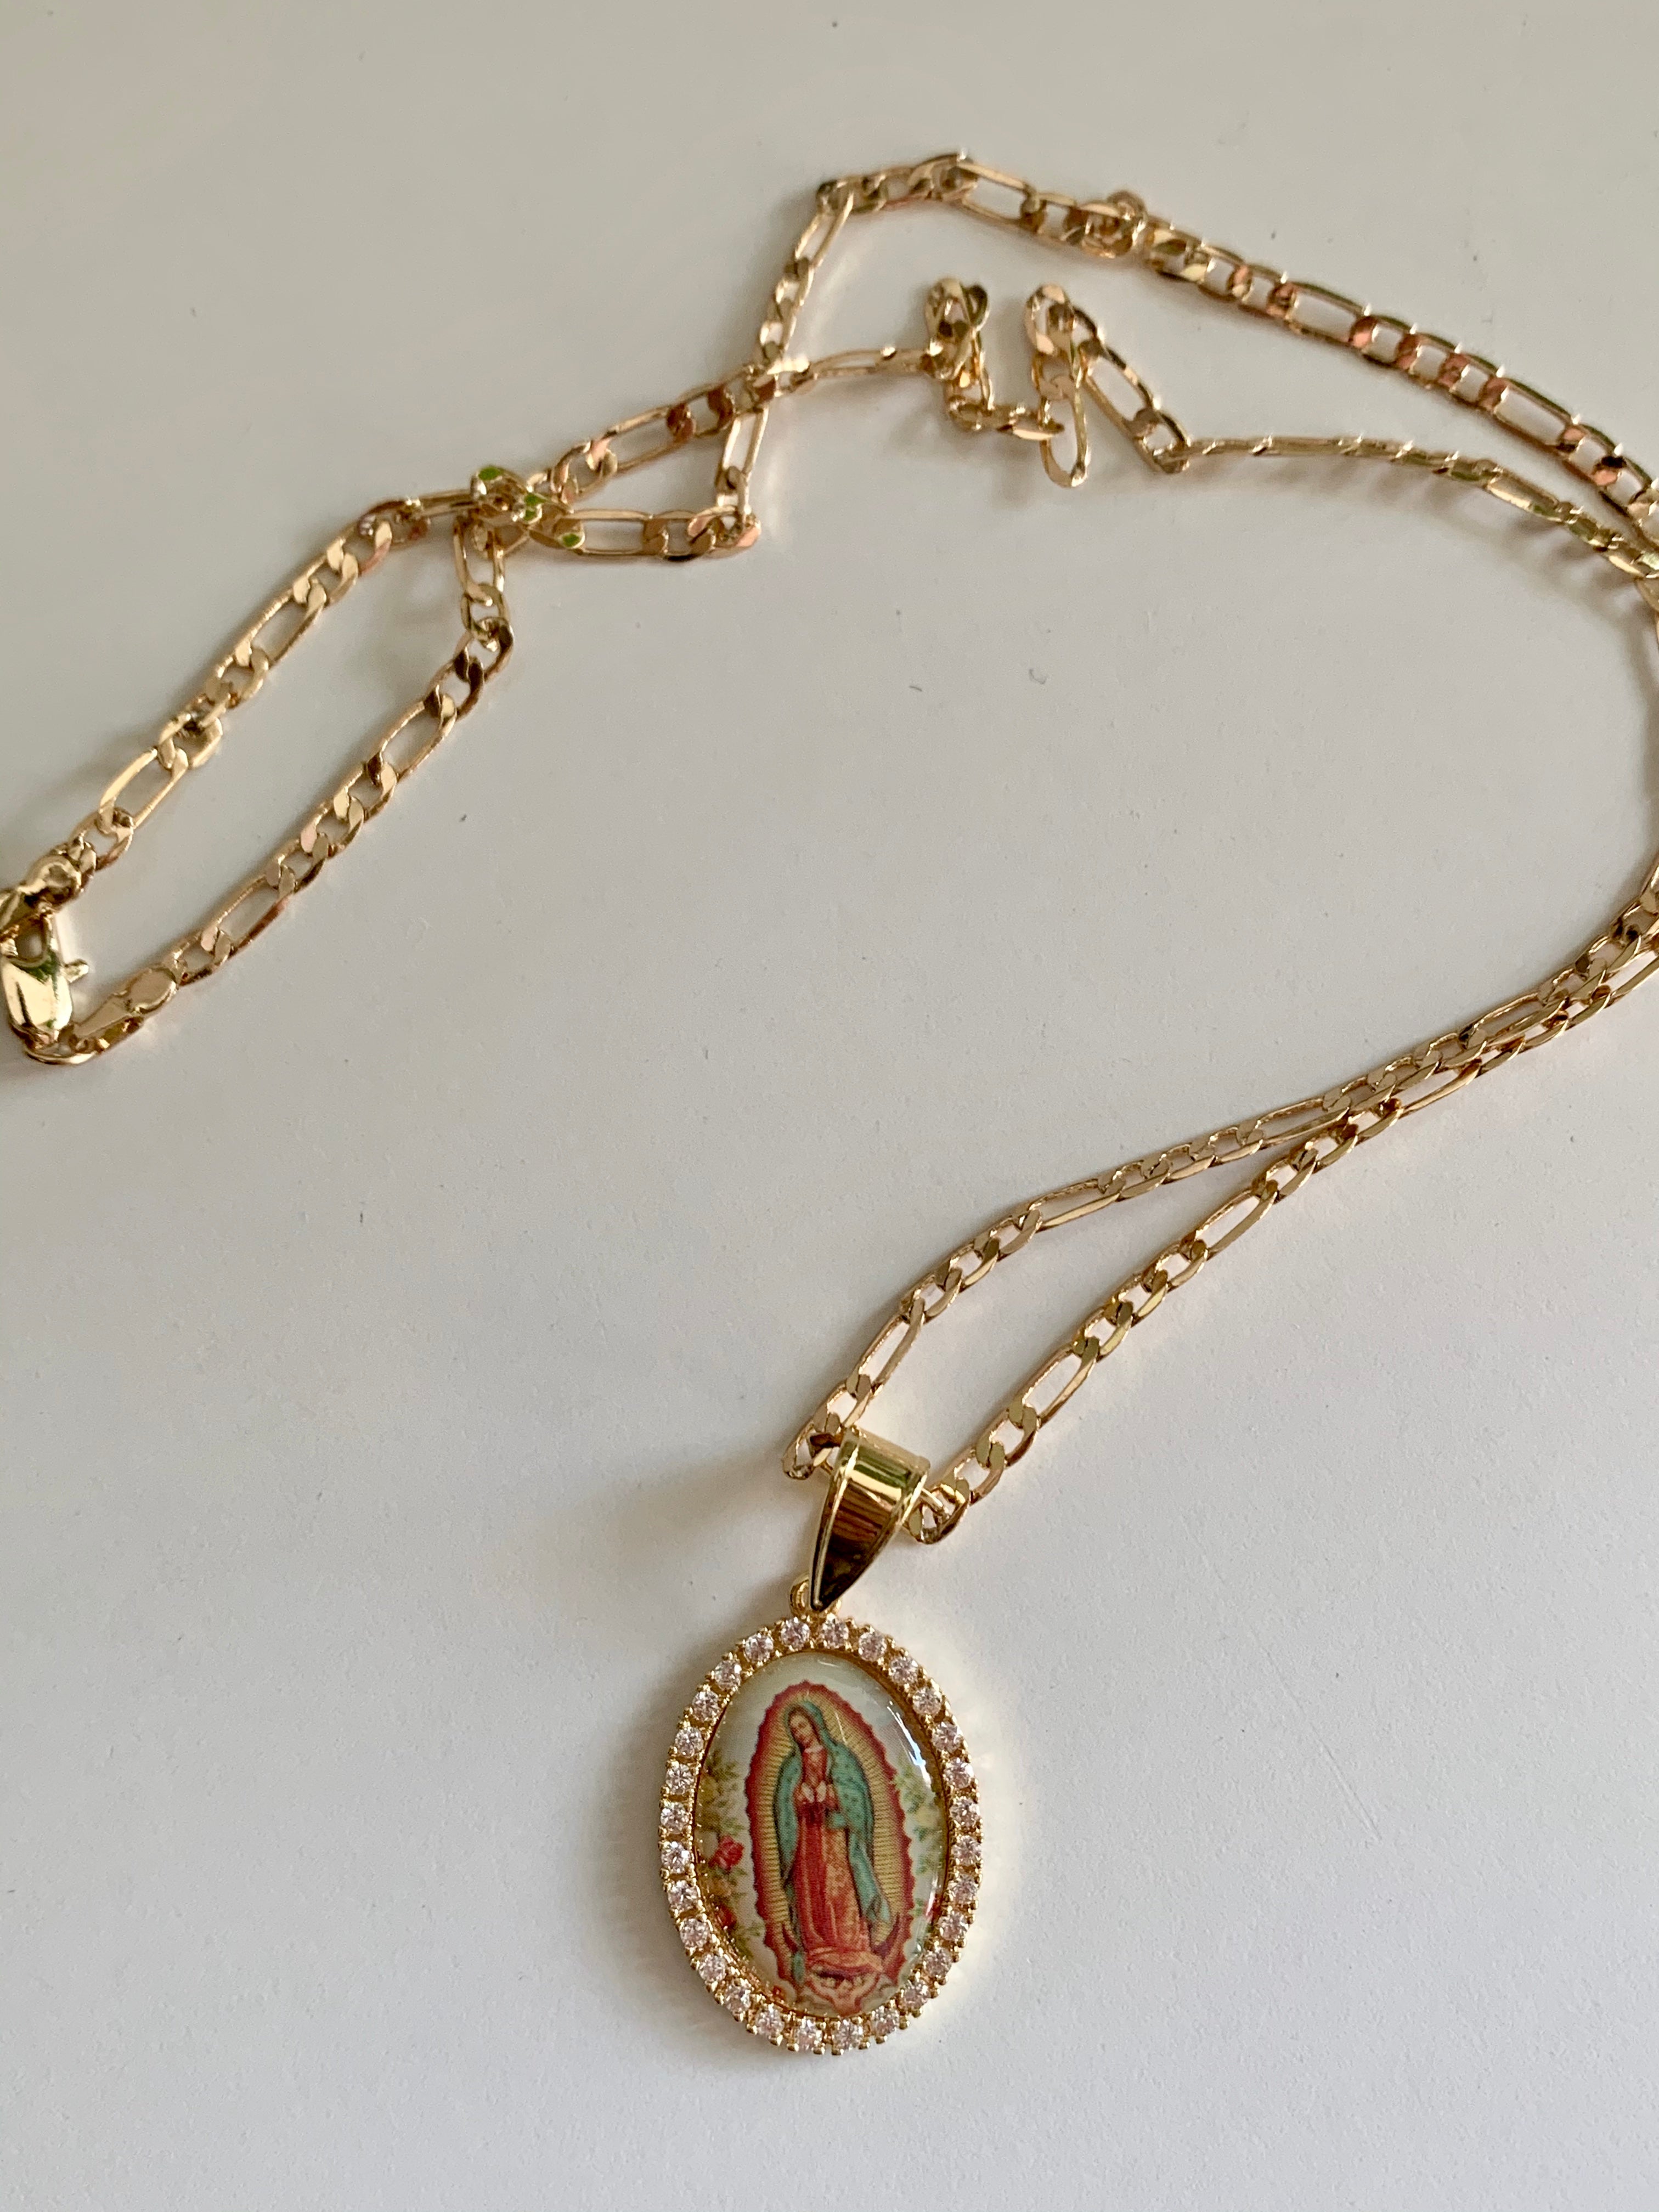 LADY OF GUADALUPE NECKLACE